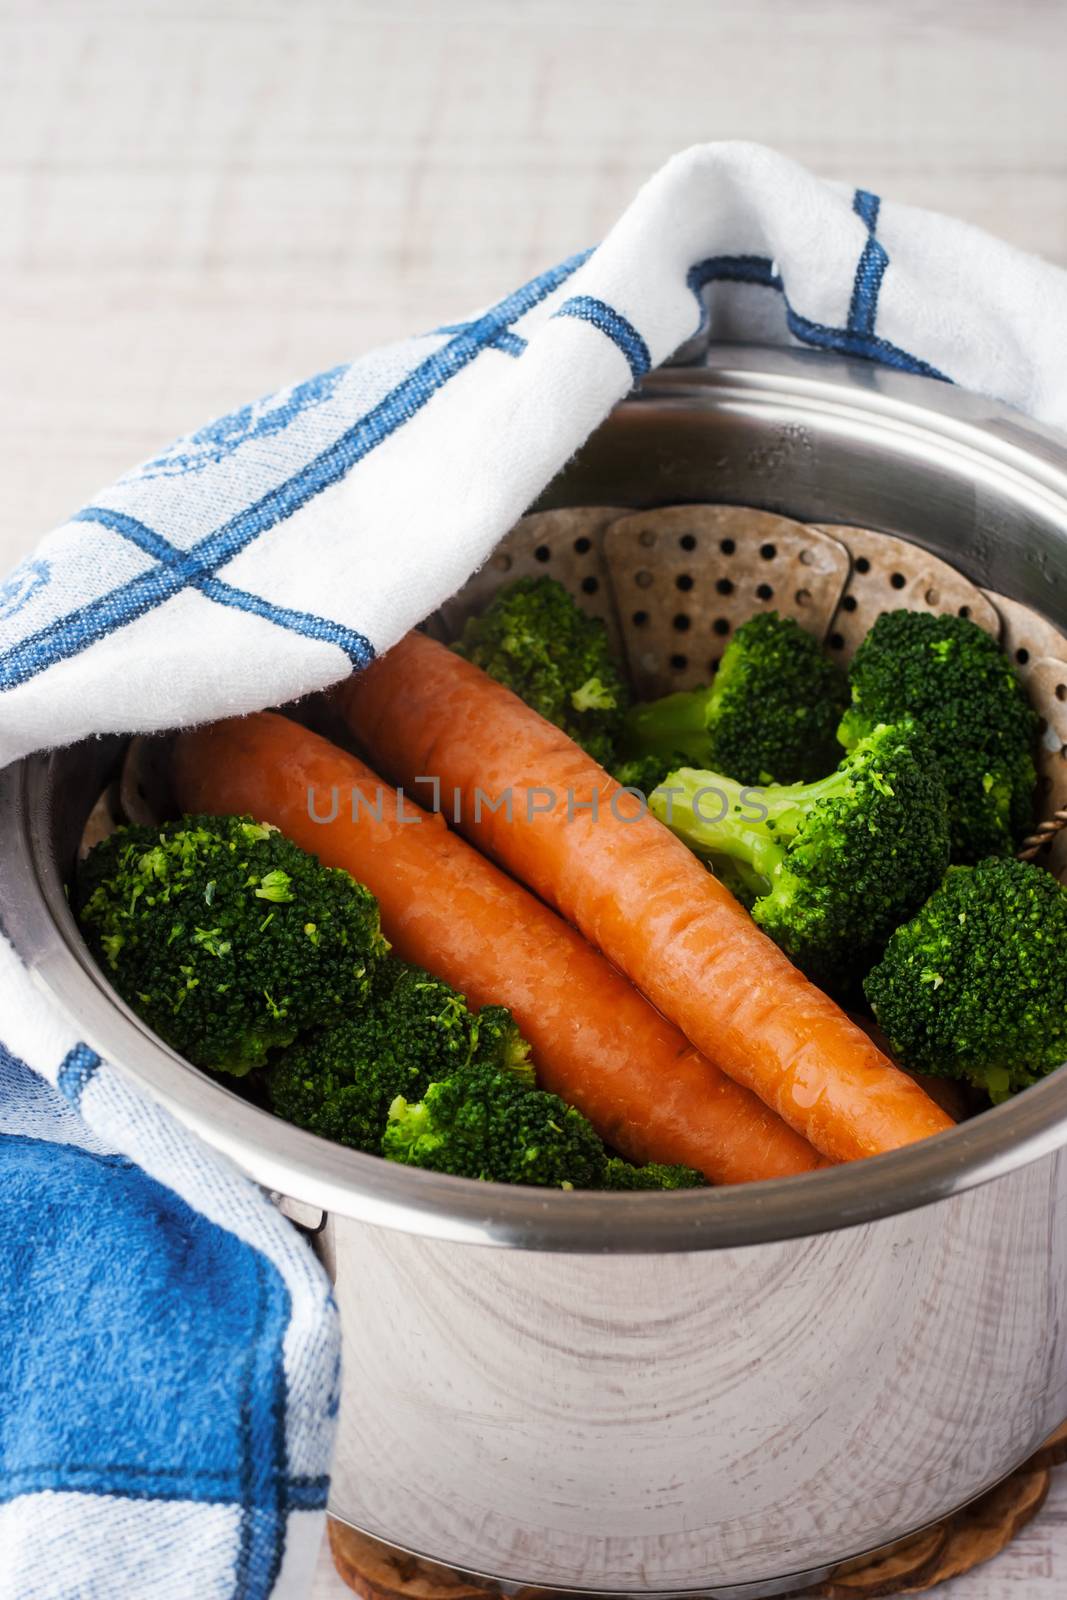 Carrots and broccoli in a steamer